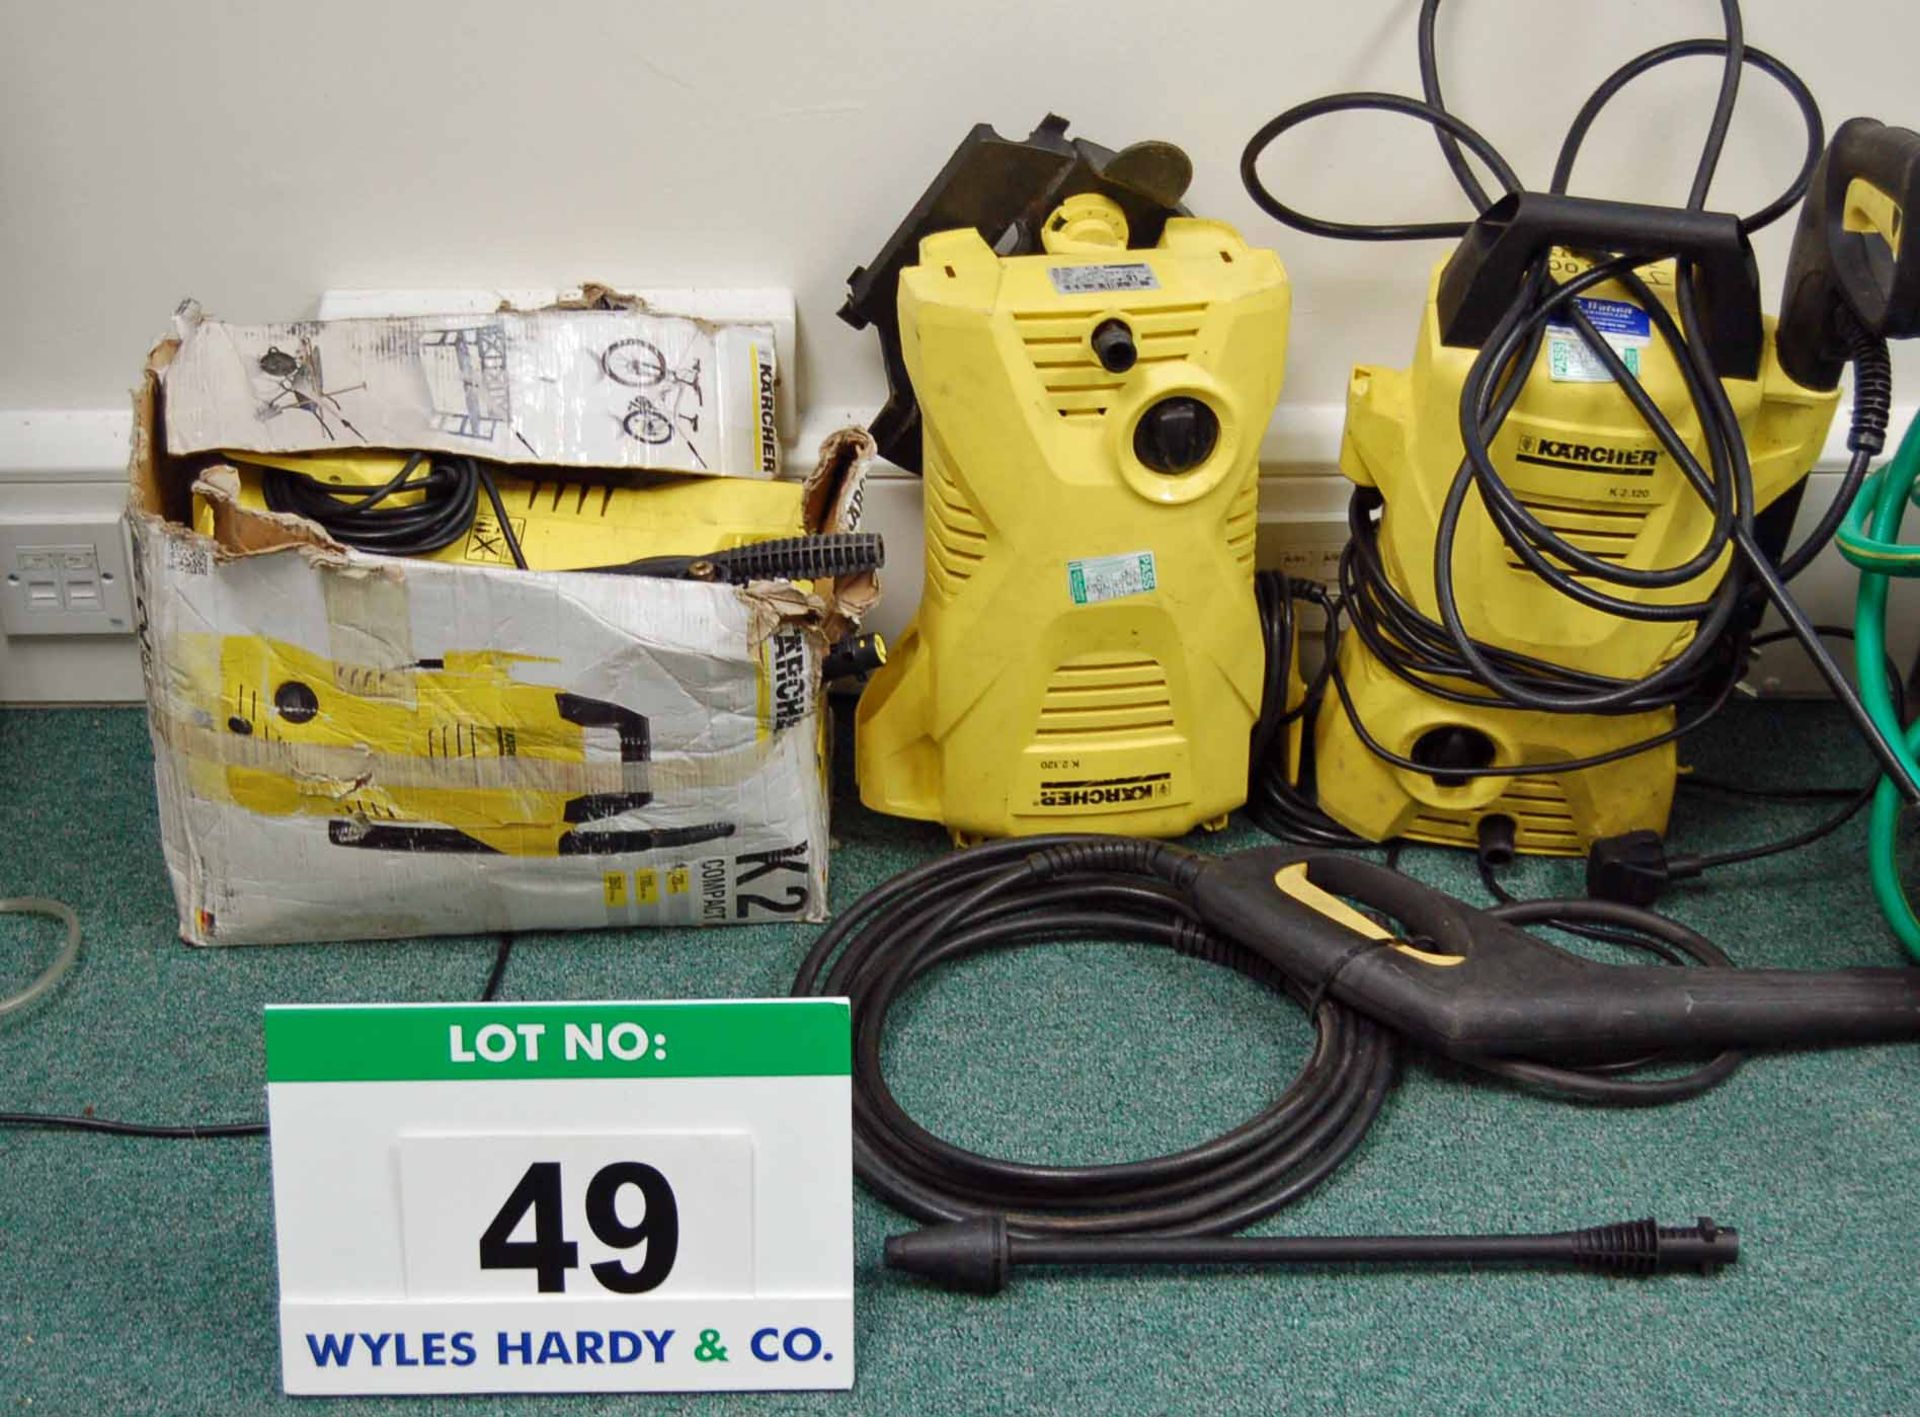 THREE K'ARCHER K2 Pressure Washers with Associated Hoses, Lances and Attachments (240V) (As